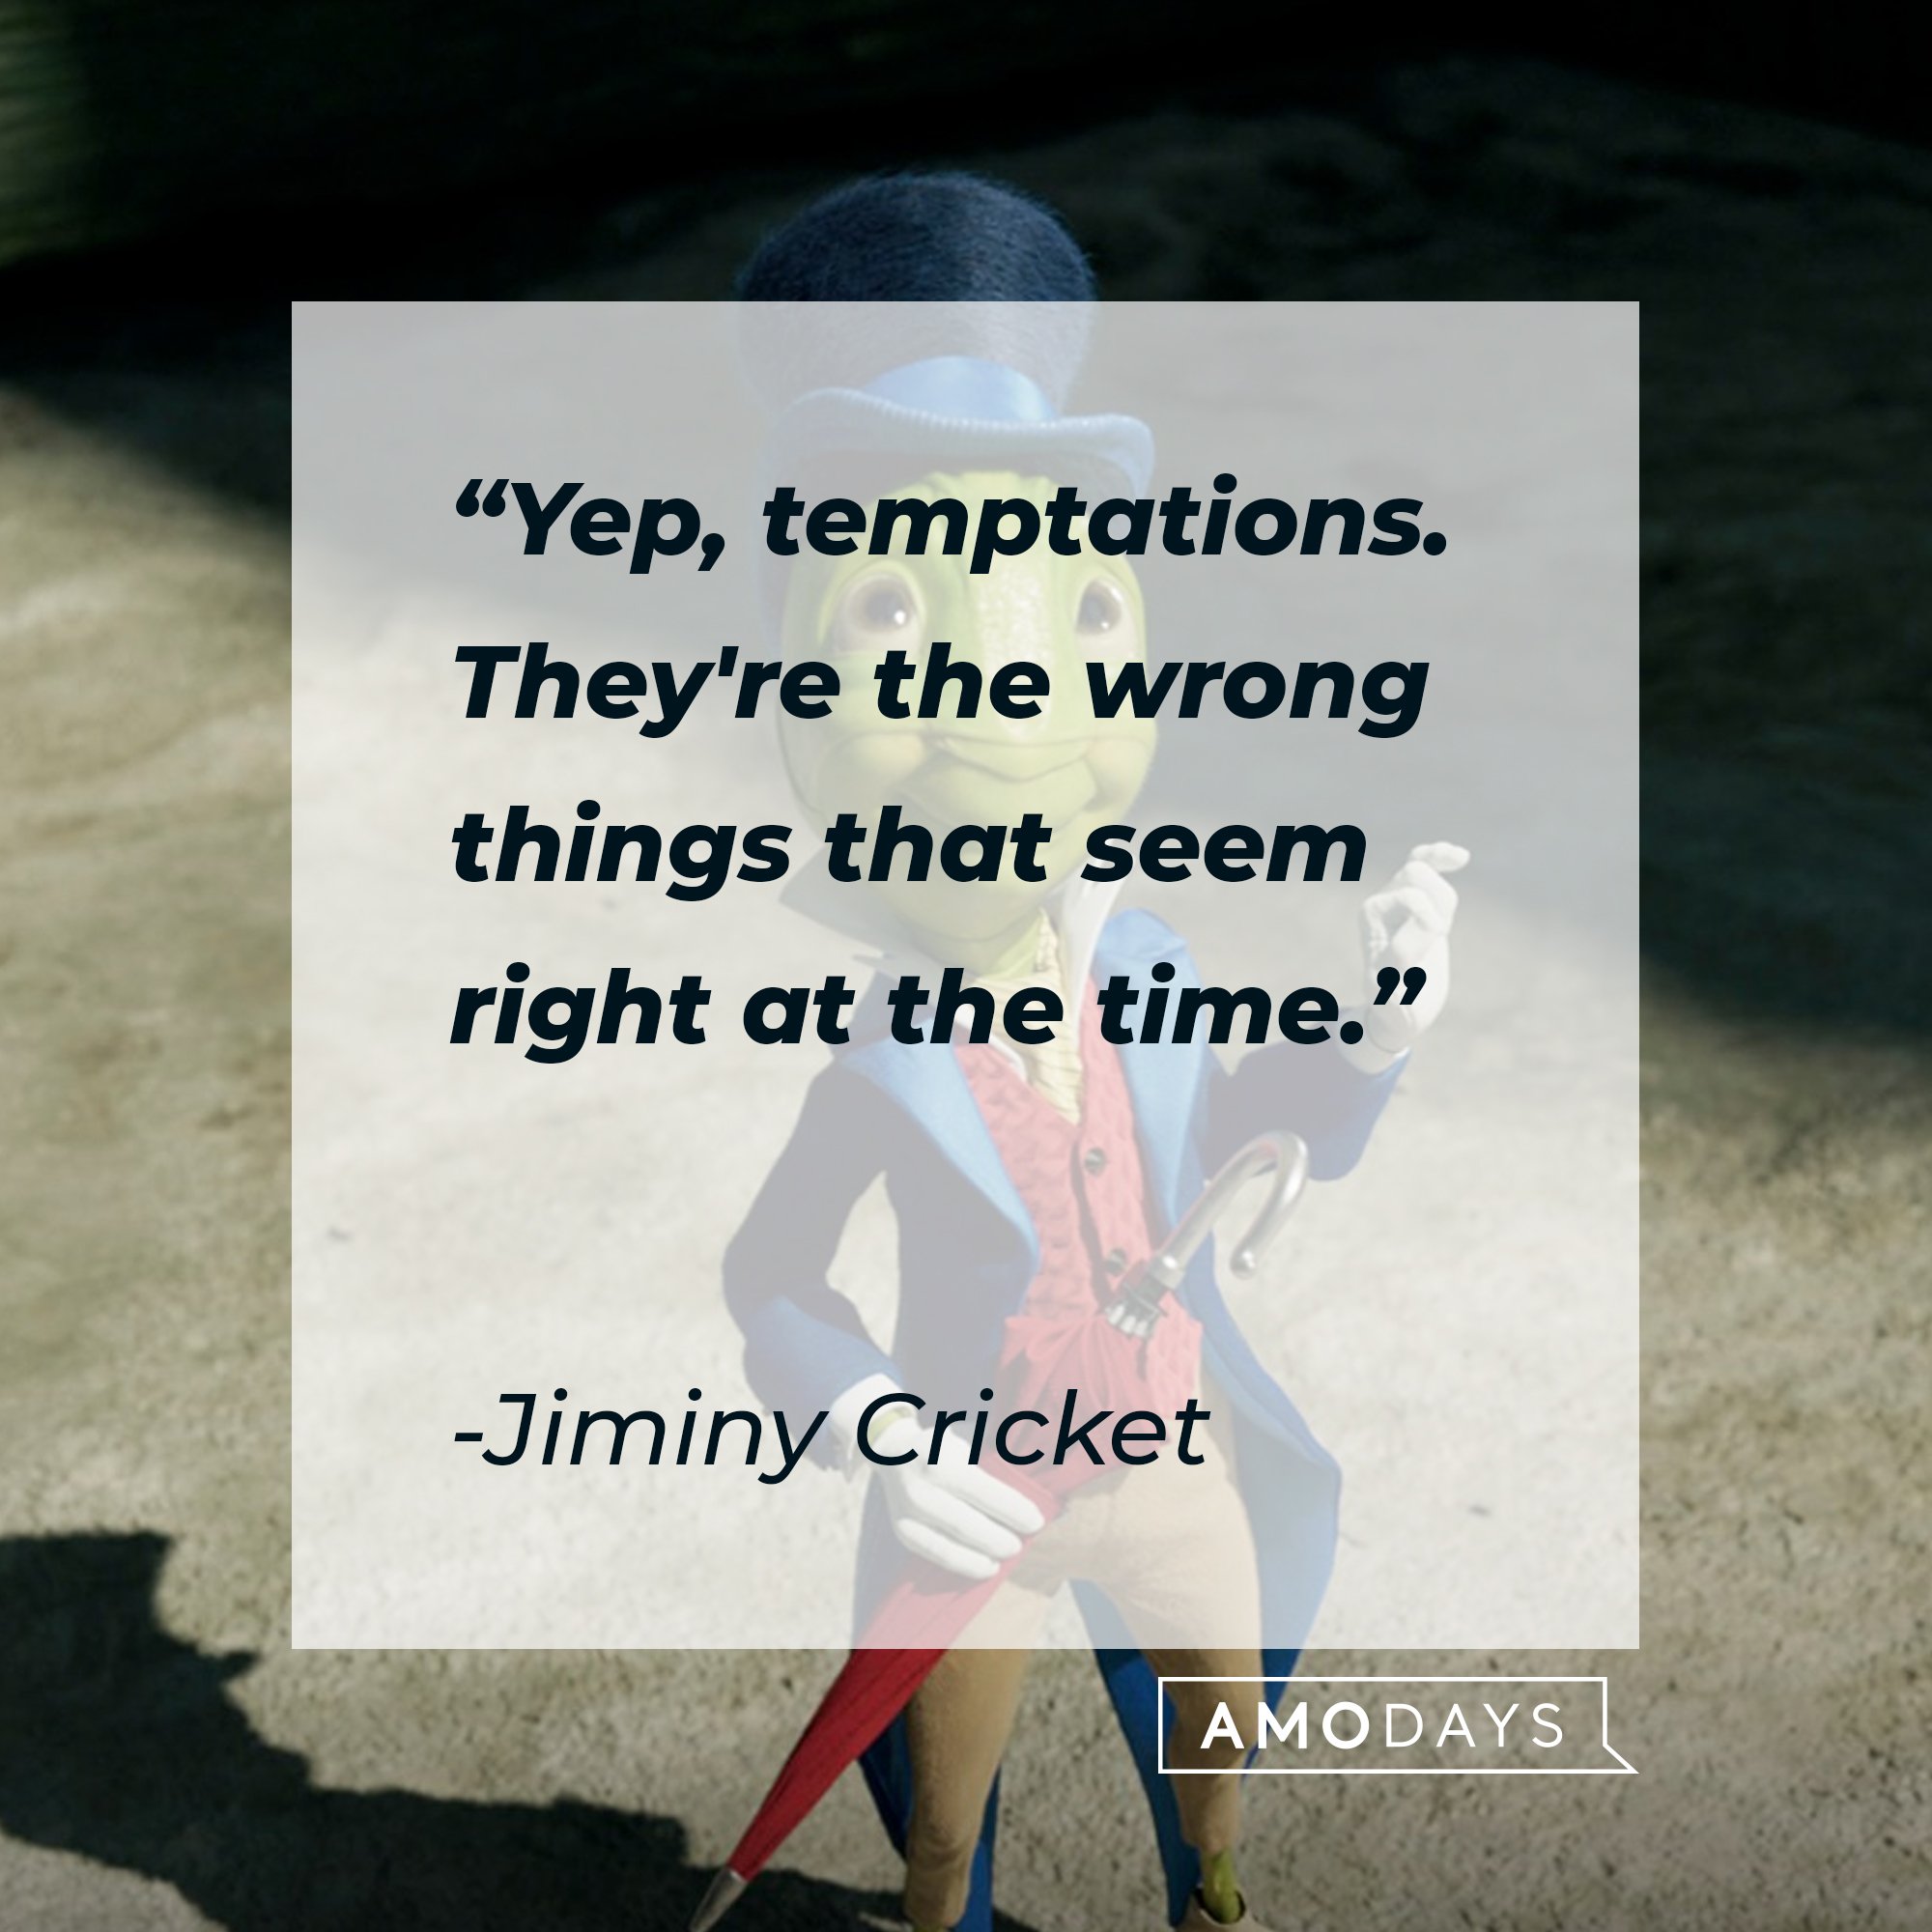  Jiminy Cricket's quote: "Yep, temptations. They're the wrong things that seem right at the time." | Image: AmoDays